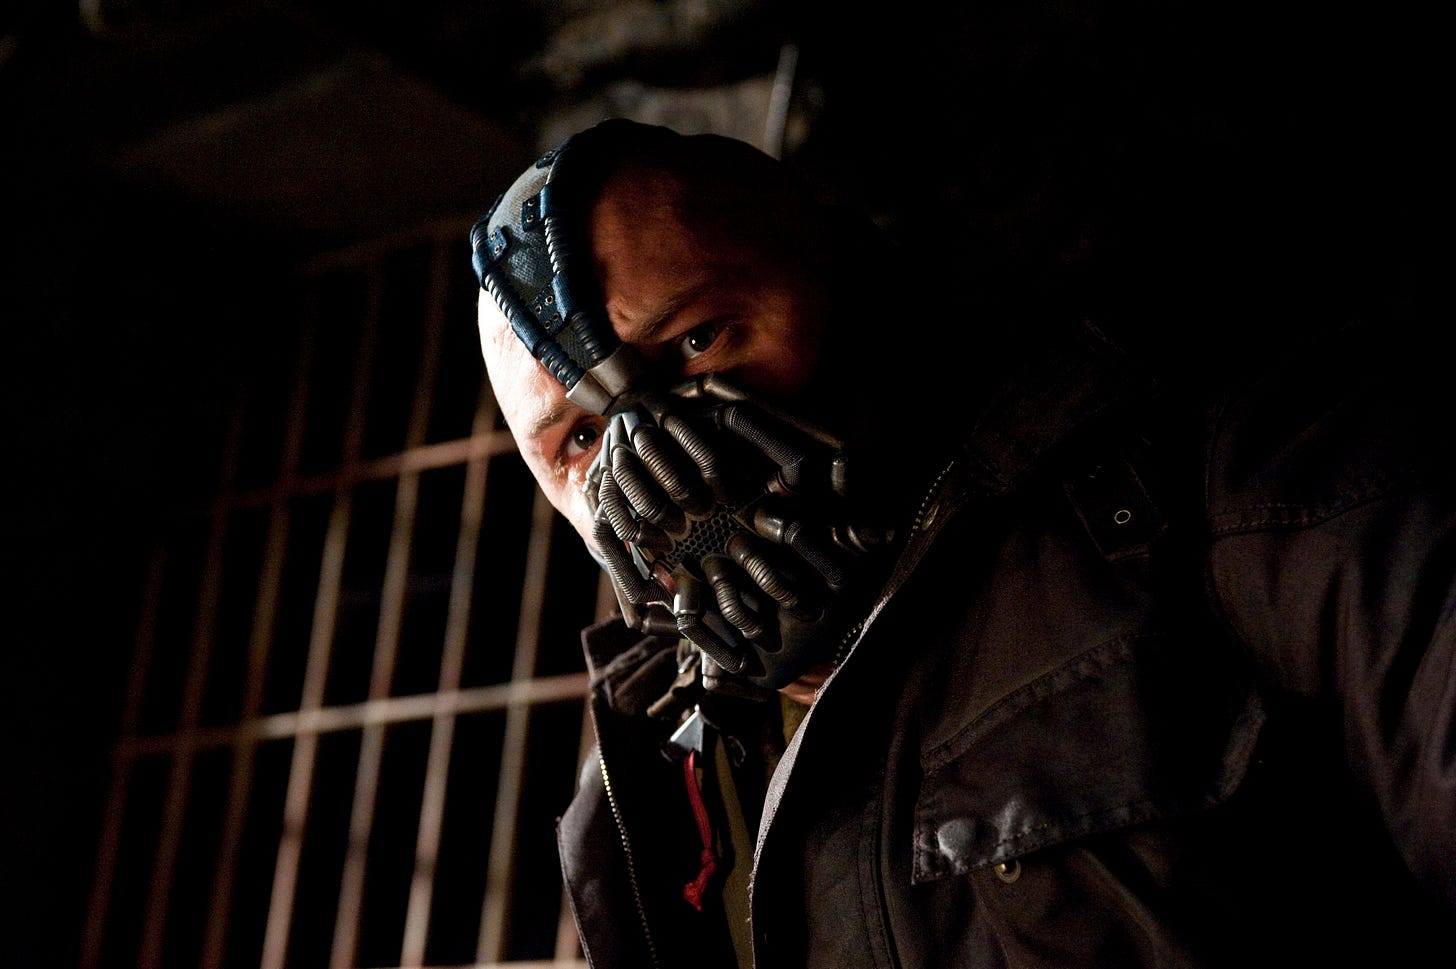 http://images5.fanpop.com/image/photos/30700000/Tom-Hardy-as-Bane-in-The-Dark-Knight-Rises-HQ-bane-30727992-2560-1703.jpg